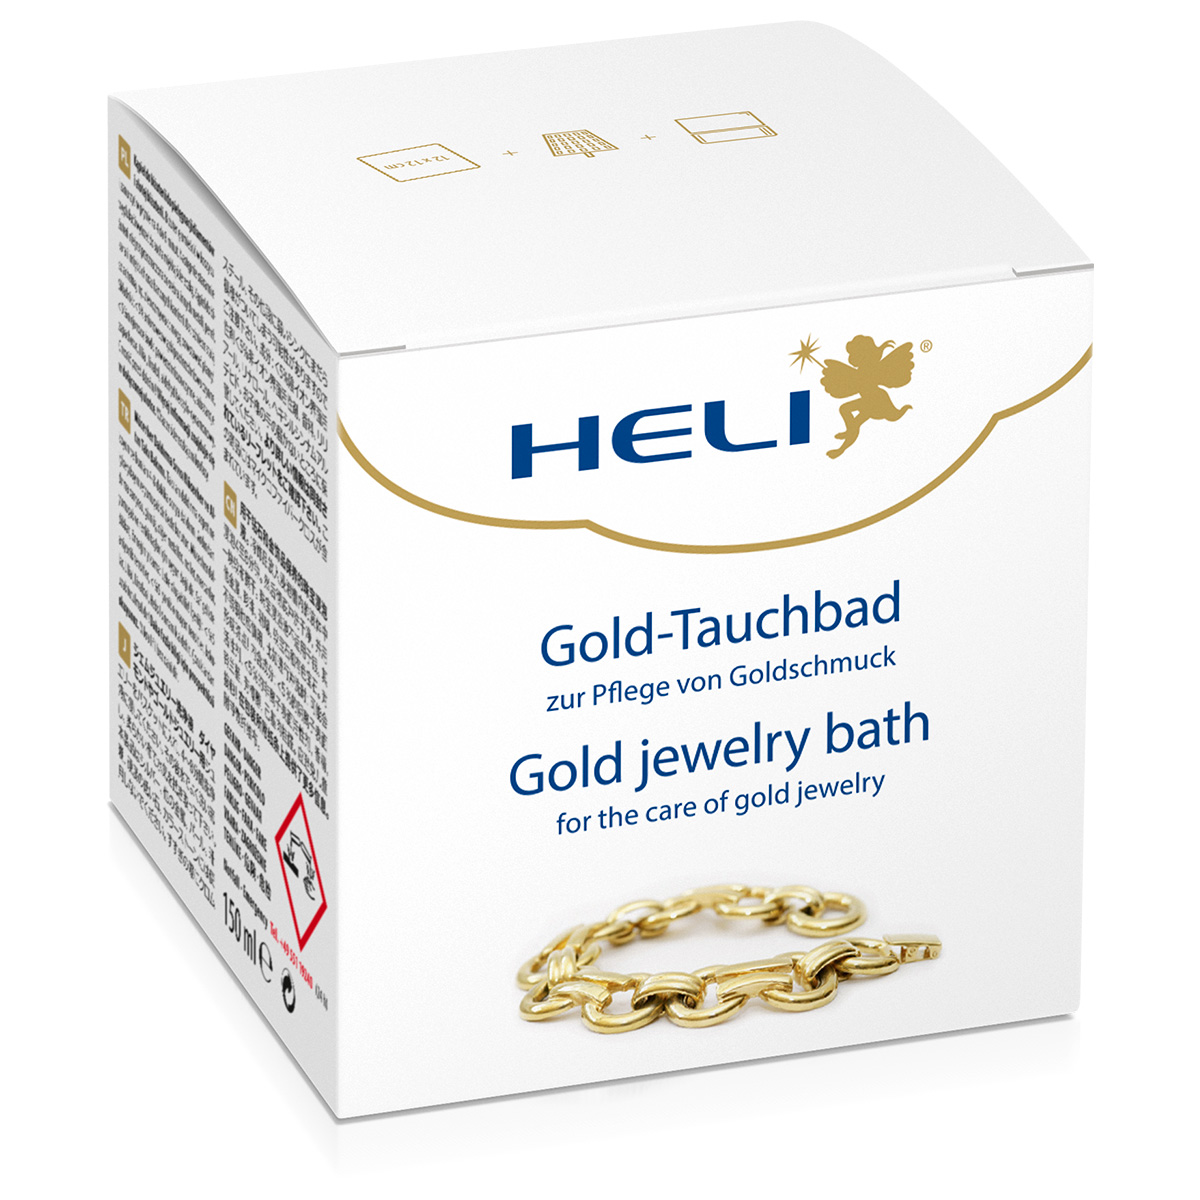 Heli gold jewelry bath with rinsing basket and cleaning cloth, jeweler's packaging, 150 ml